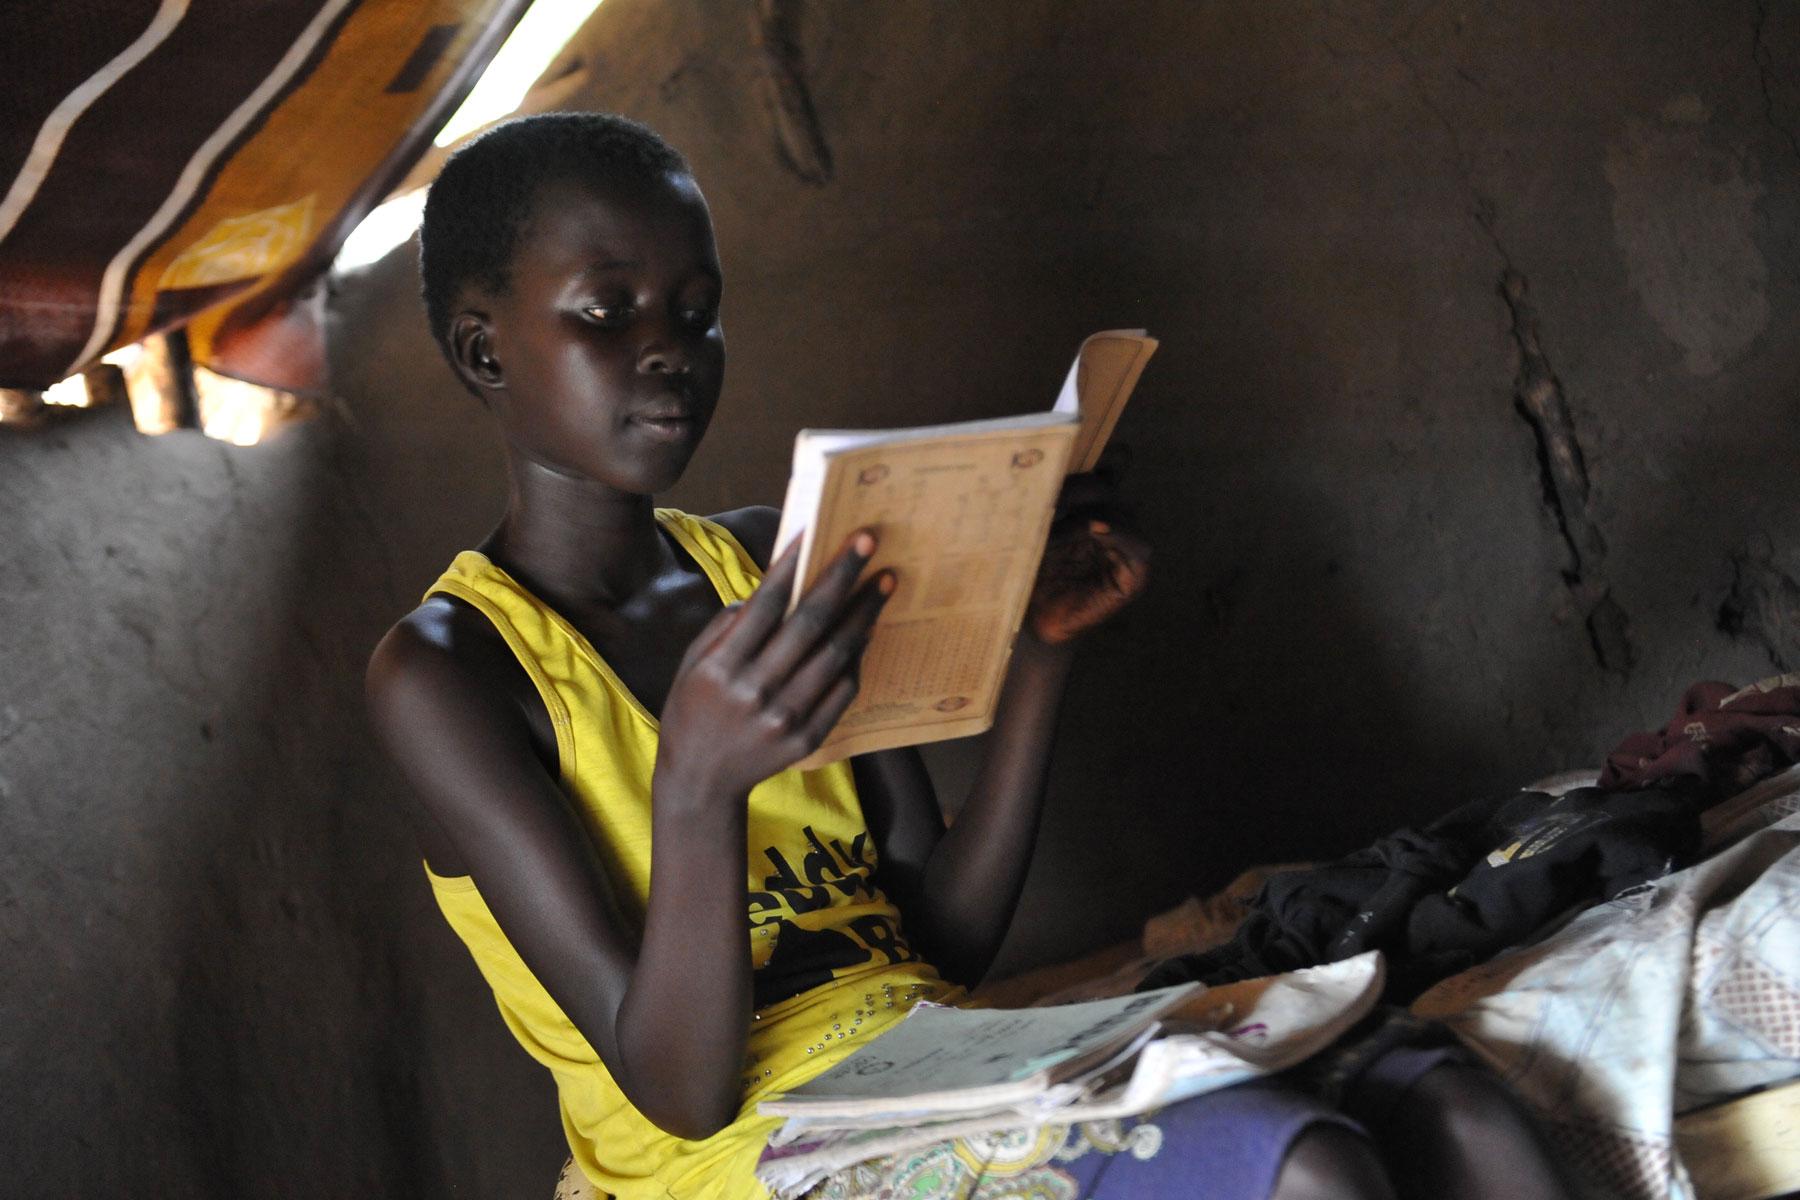 A young girl, refugee from South Sudan, studies in Adjumani, Northern Uganda. Lack of sanitation threatens the improving school enrolment for girls. Photo: LWF/ M. Renaux